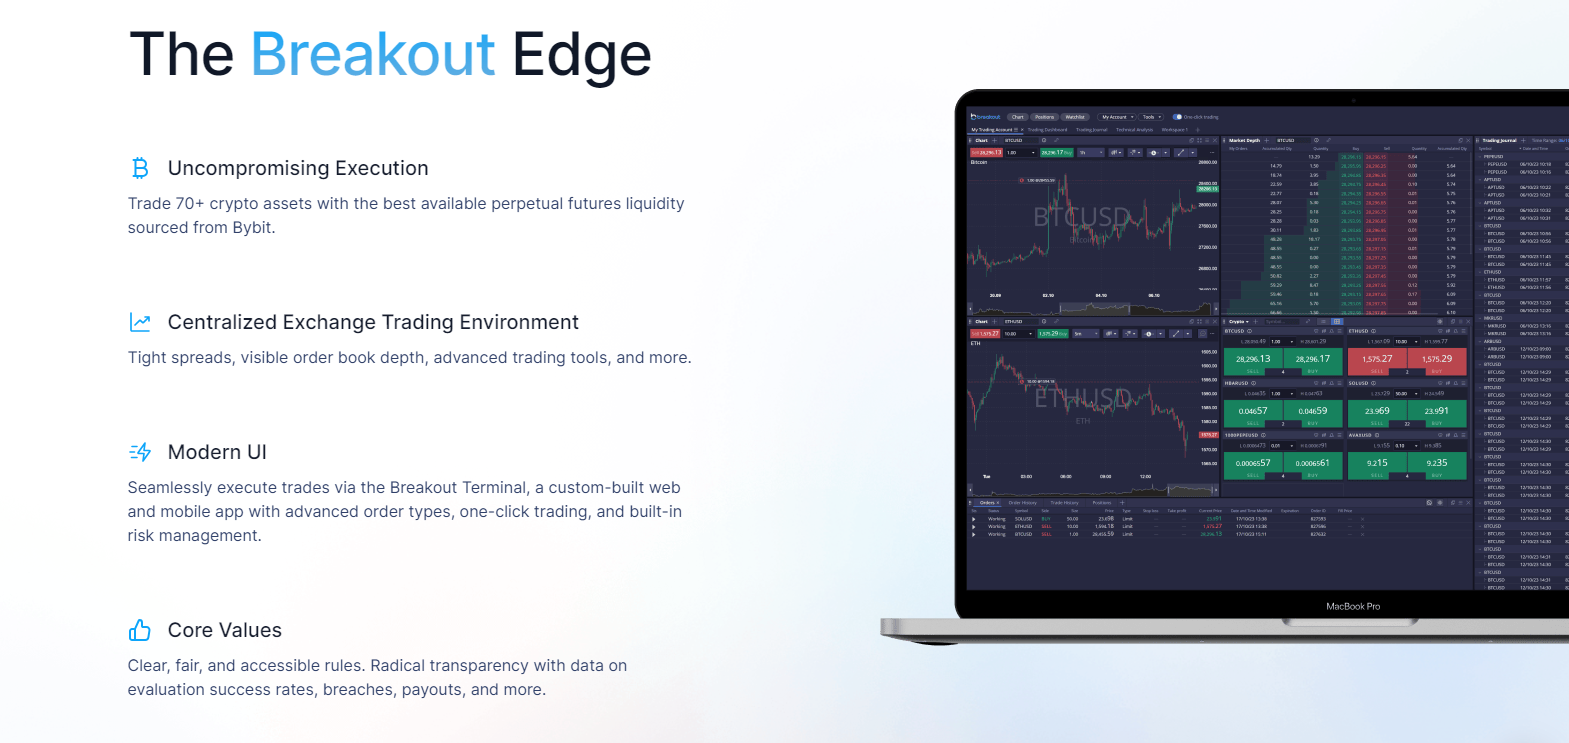 Key Policies and Trading Conditions at The Breakout Edge